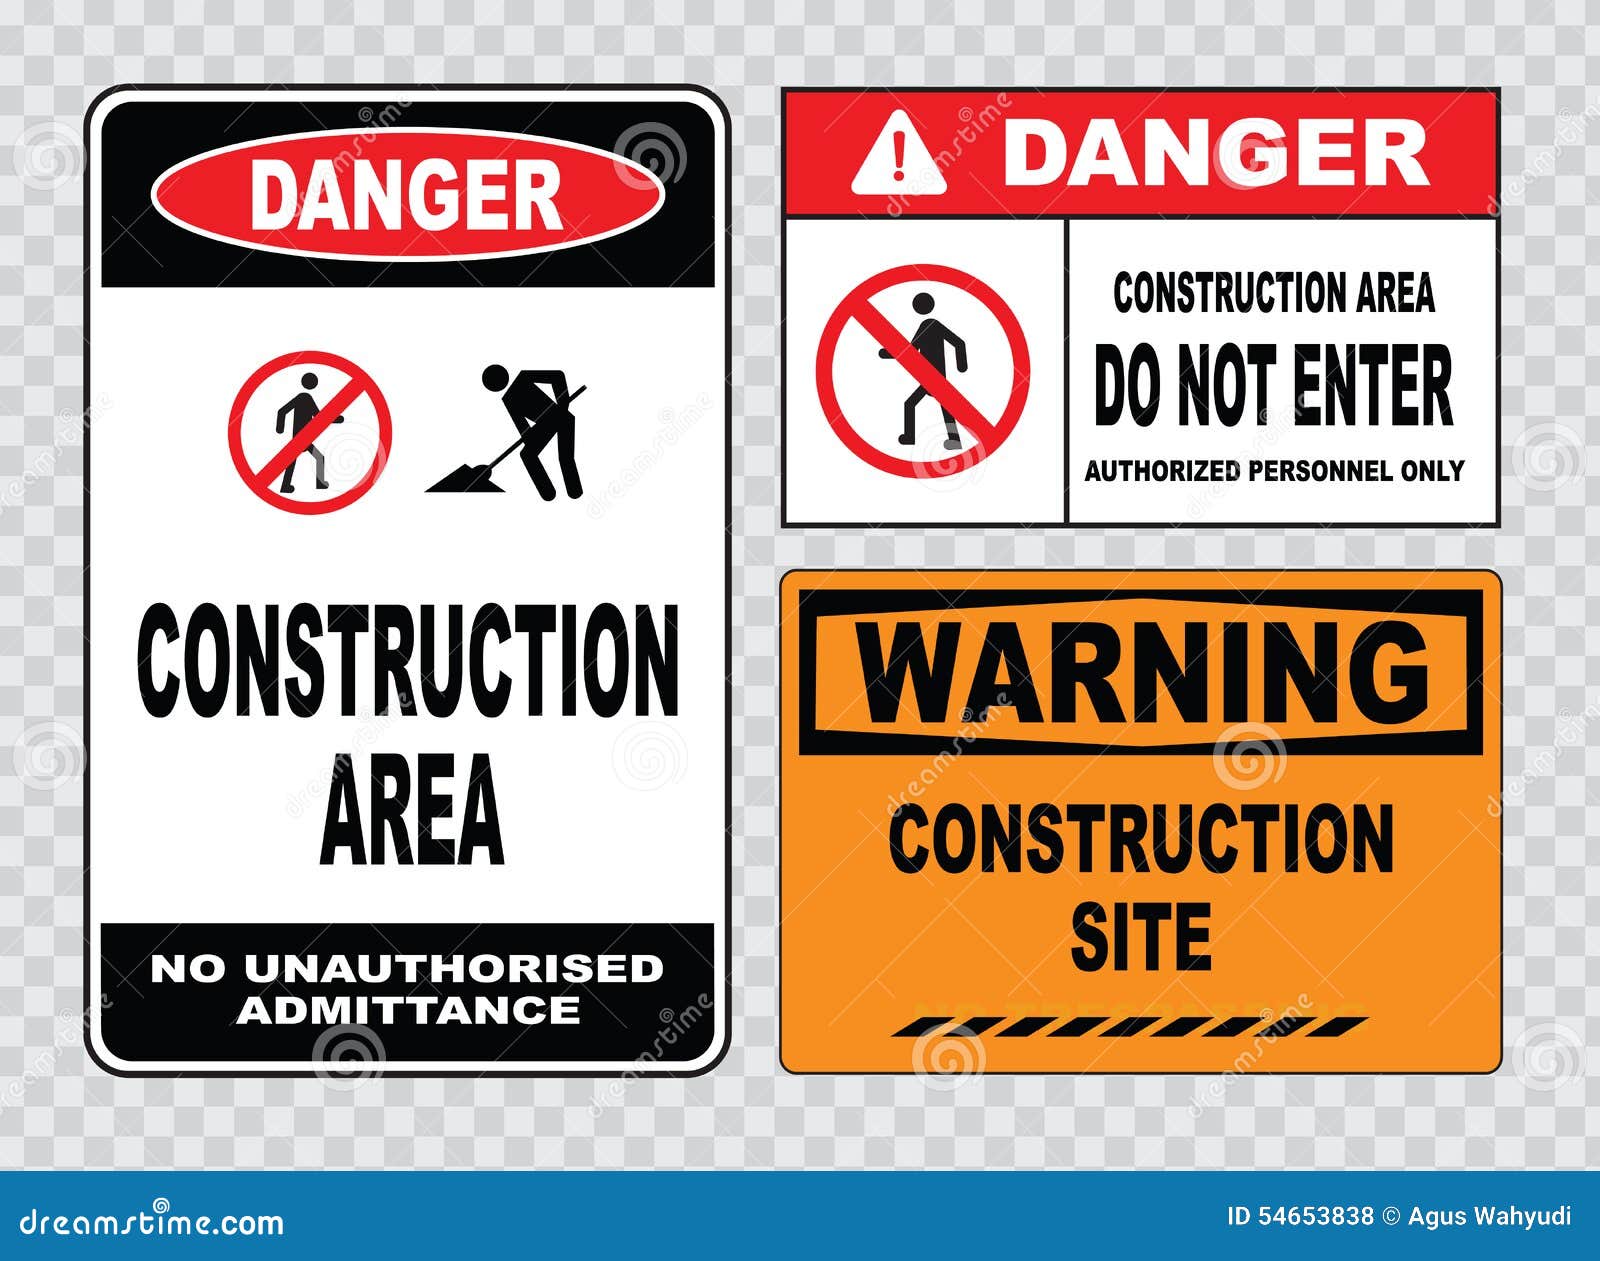 Construction Zone Dangerous Work Areas Safety Size Options Men Working Sign 